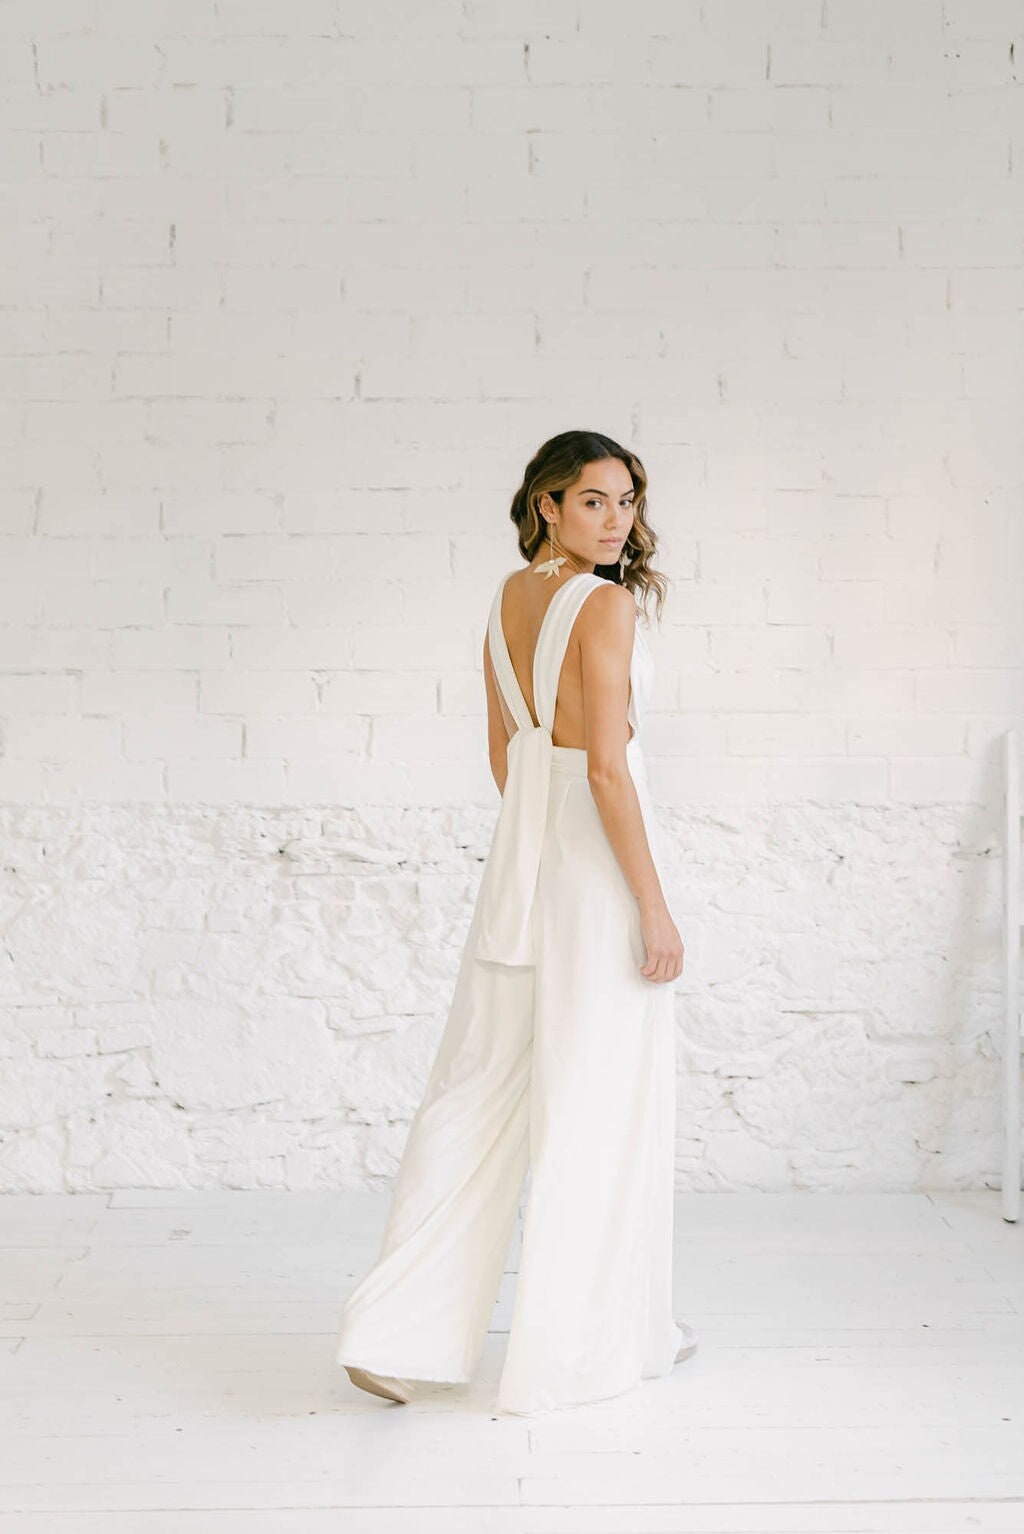 Wedding Jumpsuits and Pant Set under $700: Top 5